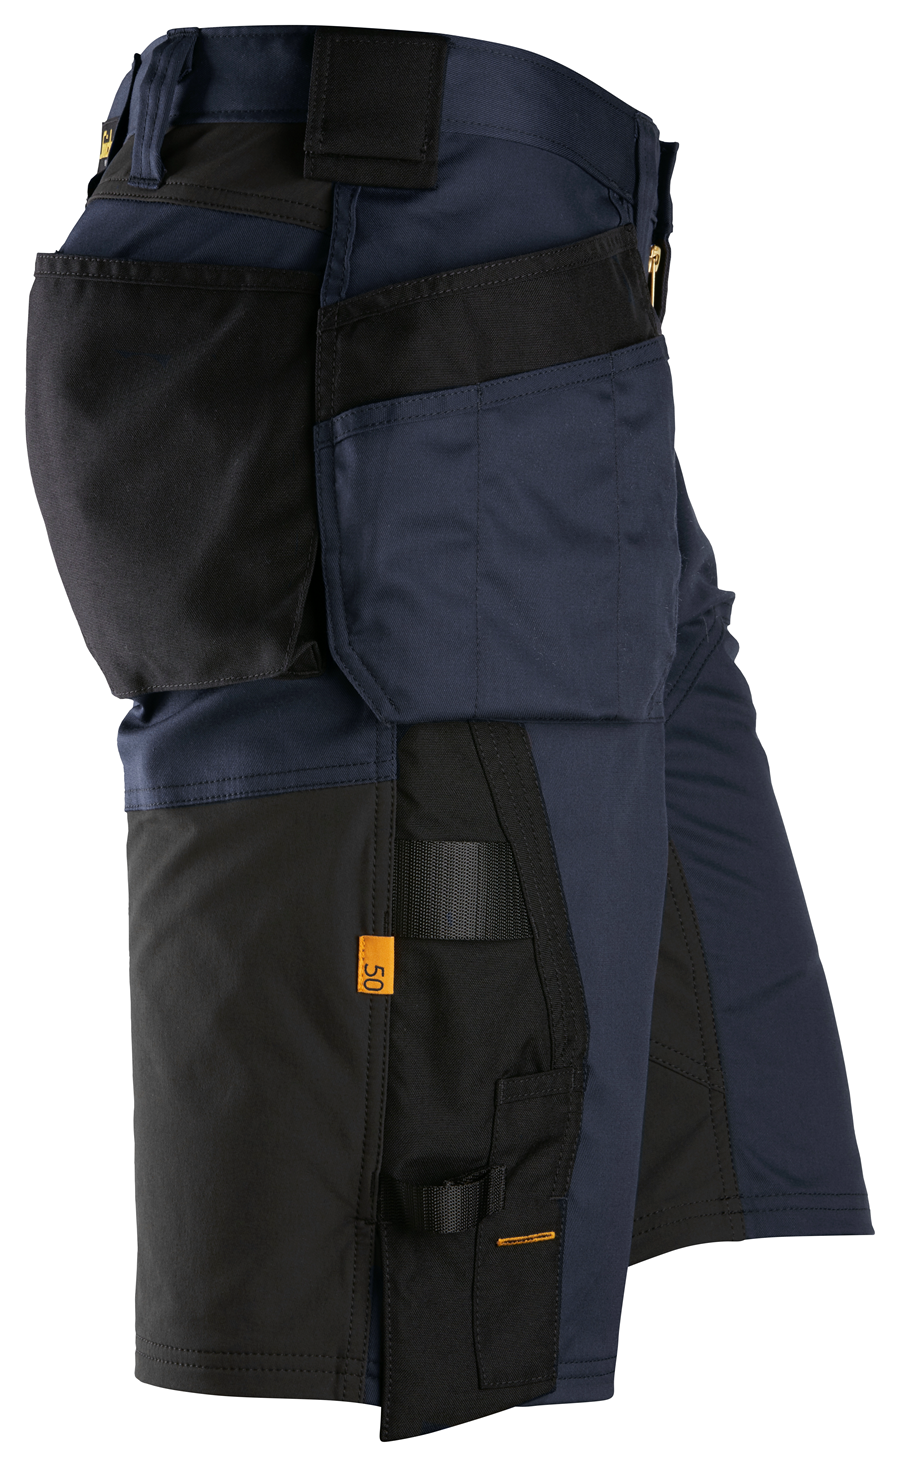 Snickers 6151 AllroundWork, Stretch Loose Fit Work Shorts Holster Pockets -  A to Z Safety Centre | PPE | Uniforms | Slim-Hosen